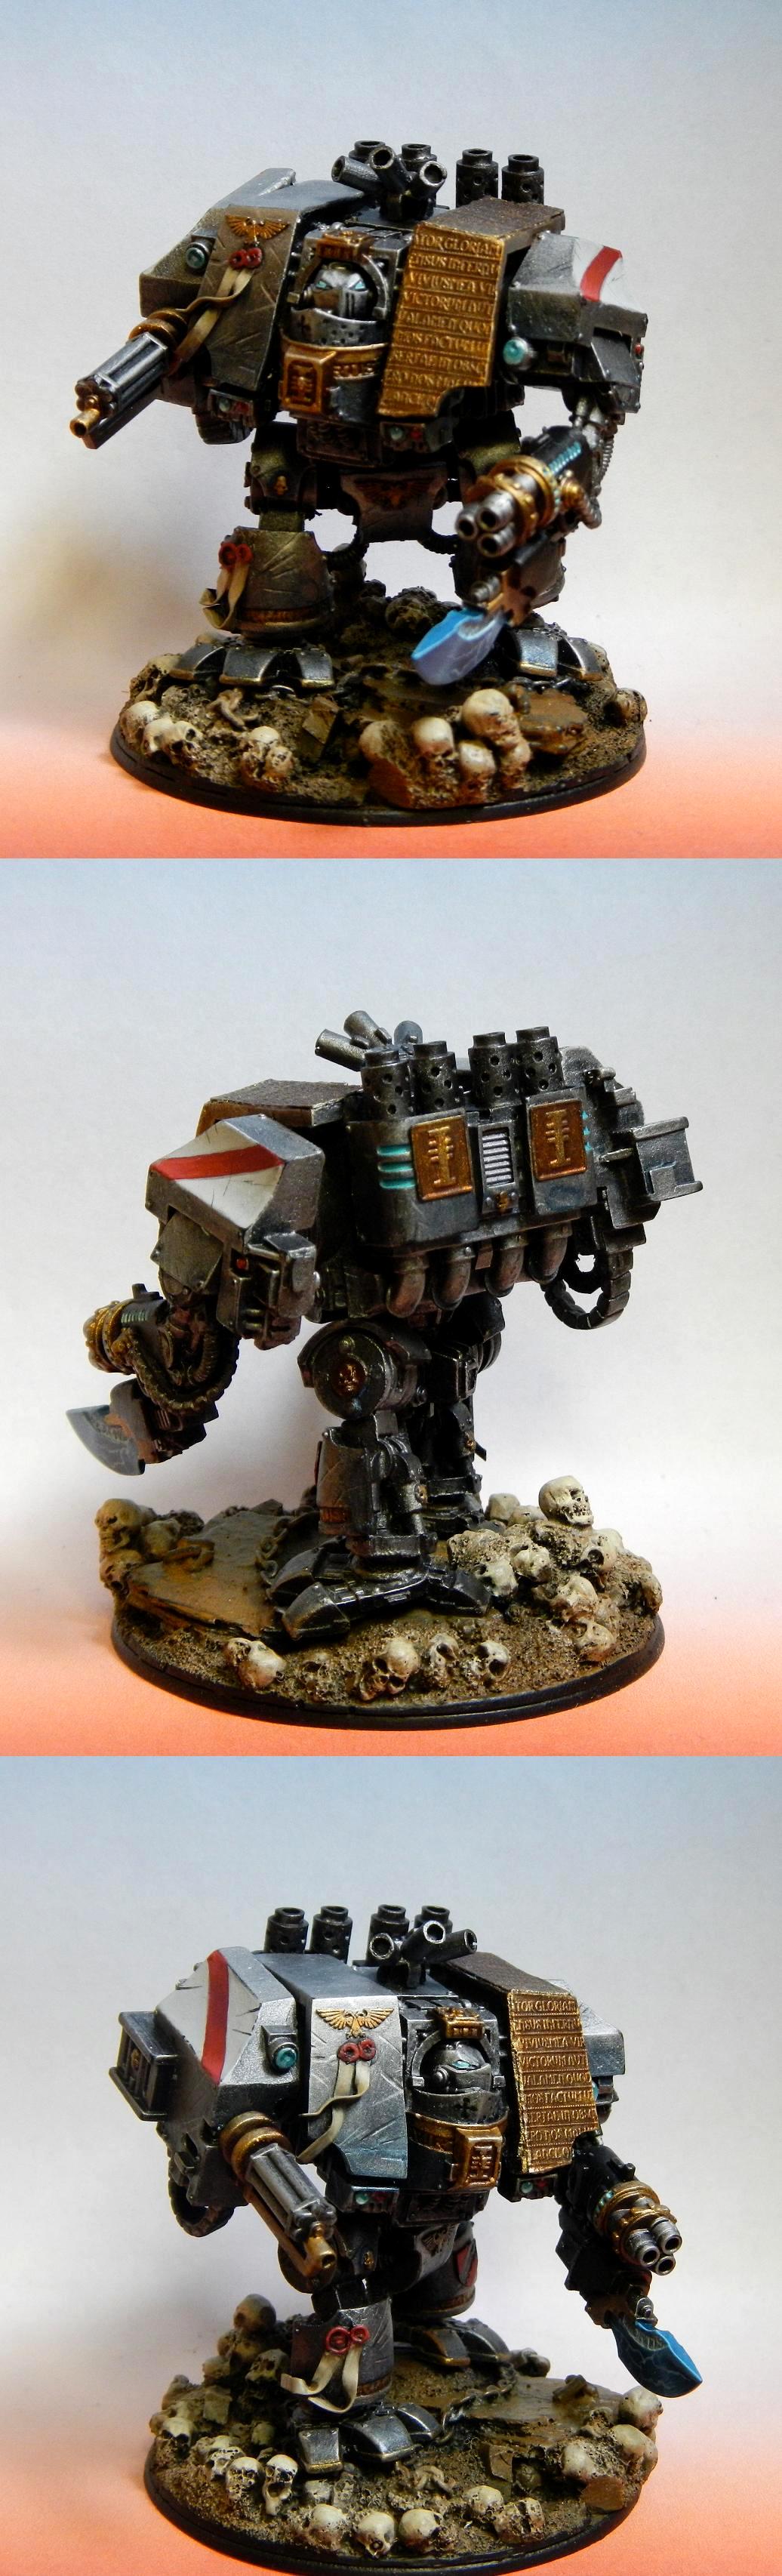 Dreadnought, Grey Knights, Inquisition, Inquisitor